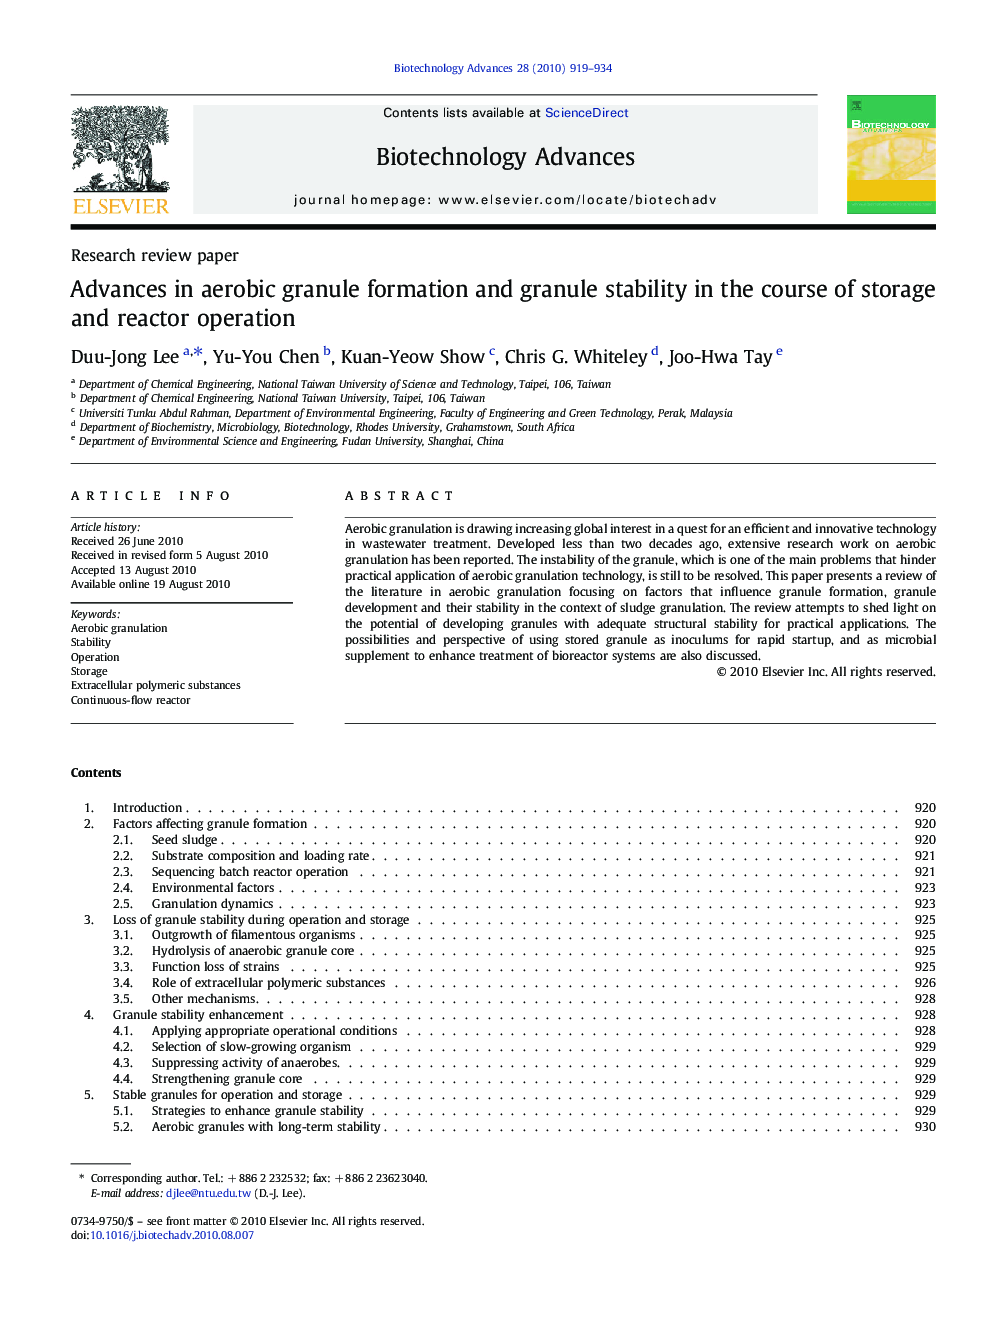 Advances in aerobic granule formation and granule stability in the course of storage and reactor operation